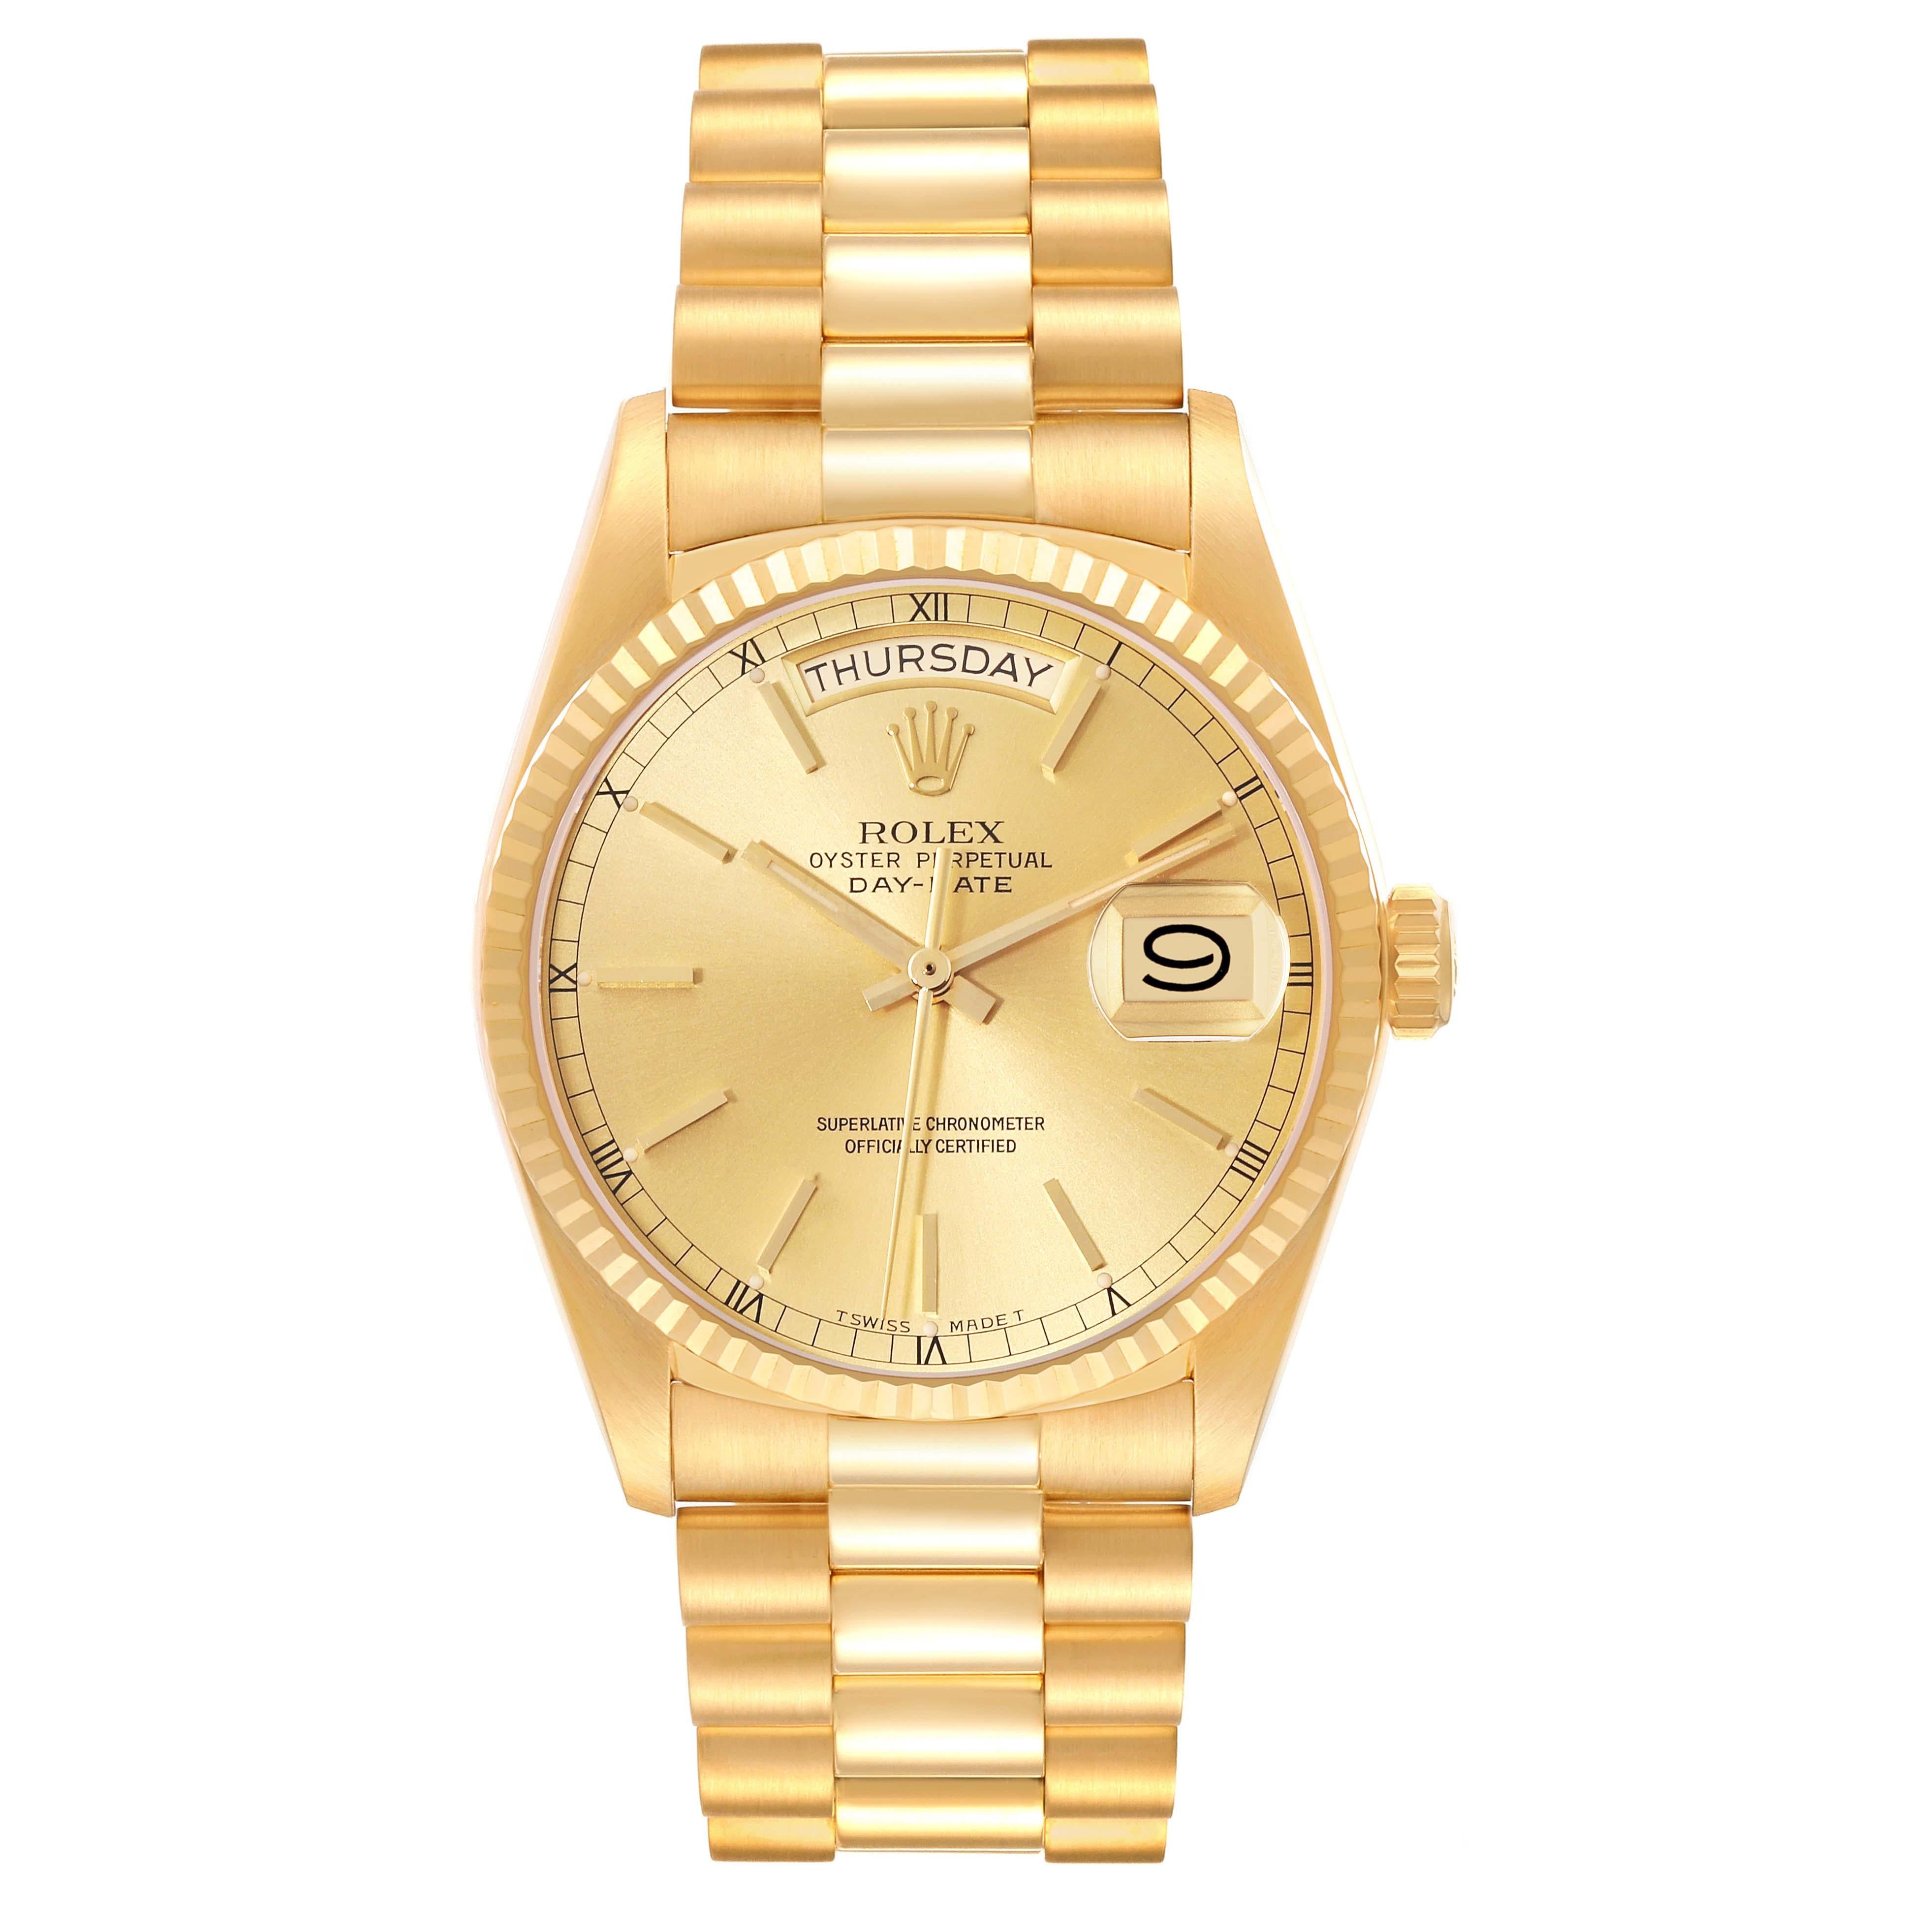 Rolex President Day-Date Yellow Gold Champagne Dial Mens Watch 18038 For Sale 6